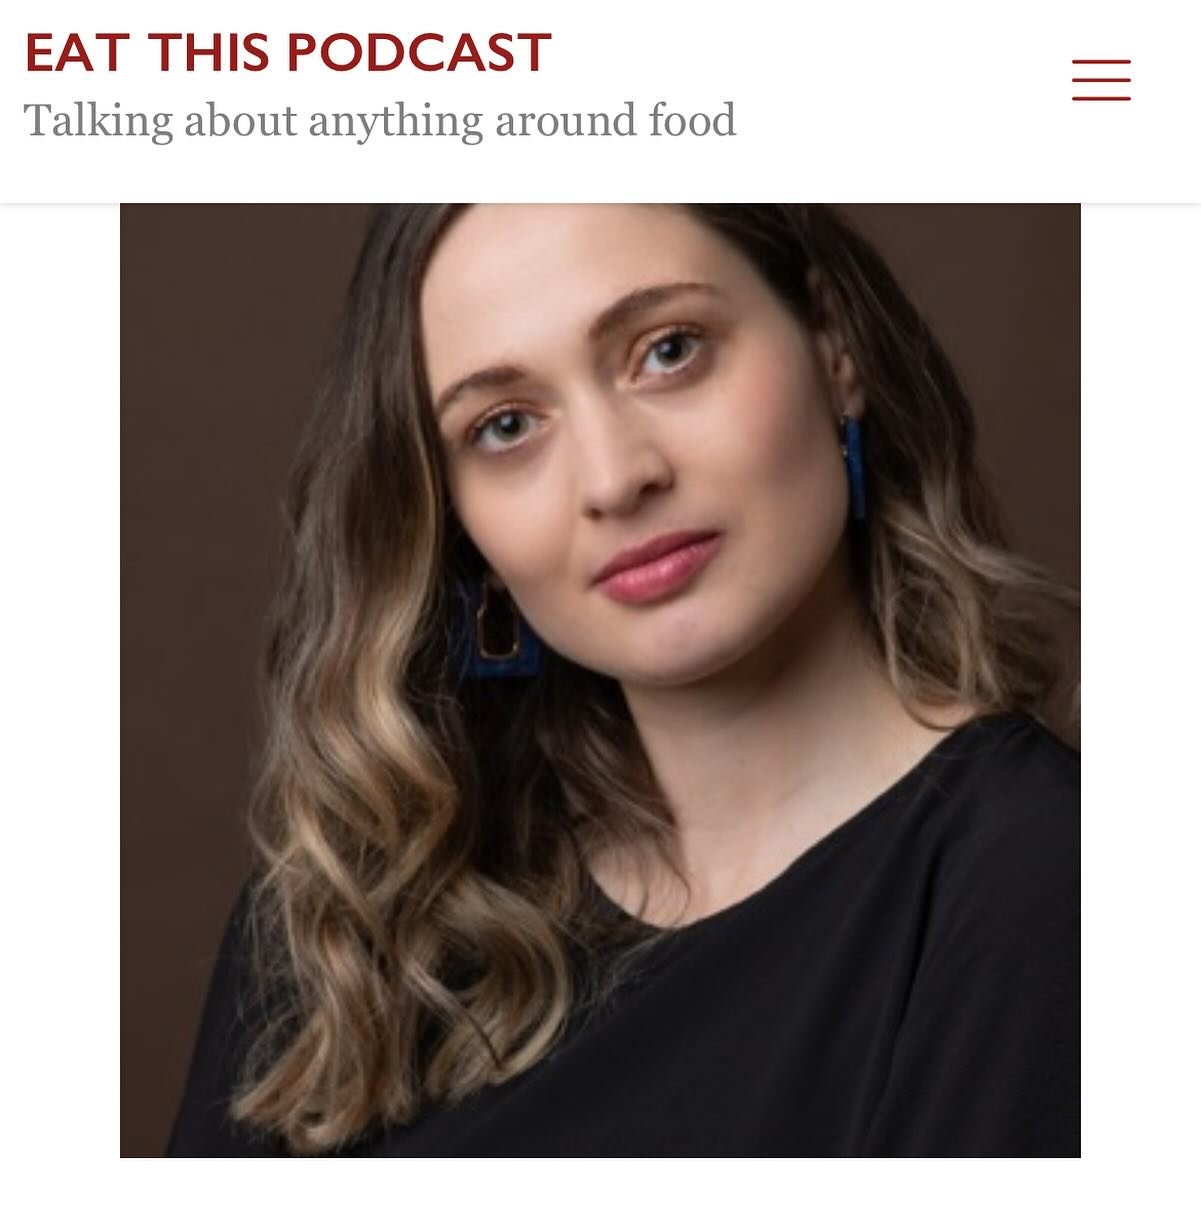 Thank you @eatthispodcast for having me! Check out my latest podcast episode &lsquo;Leftovers Through History&rsquo; via link in bio or stories ⬆️
&lsquo;For me, leftovers become waste when they turn green and furry, forgotten at the back of the frid